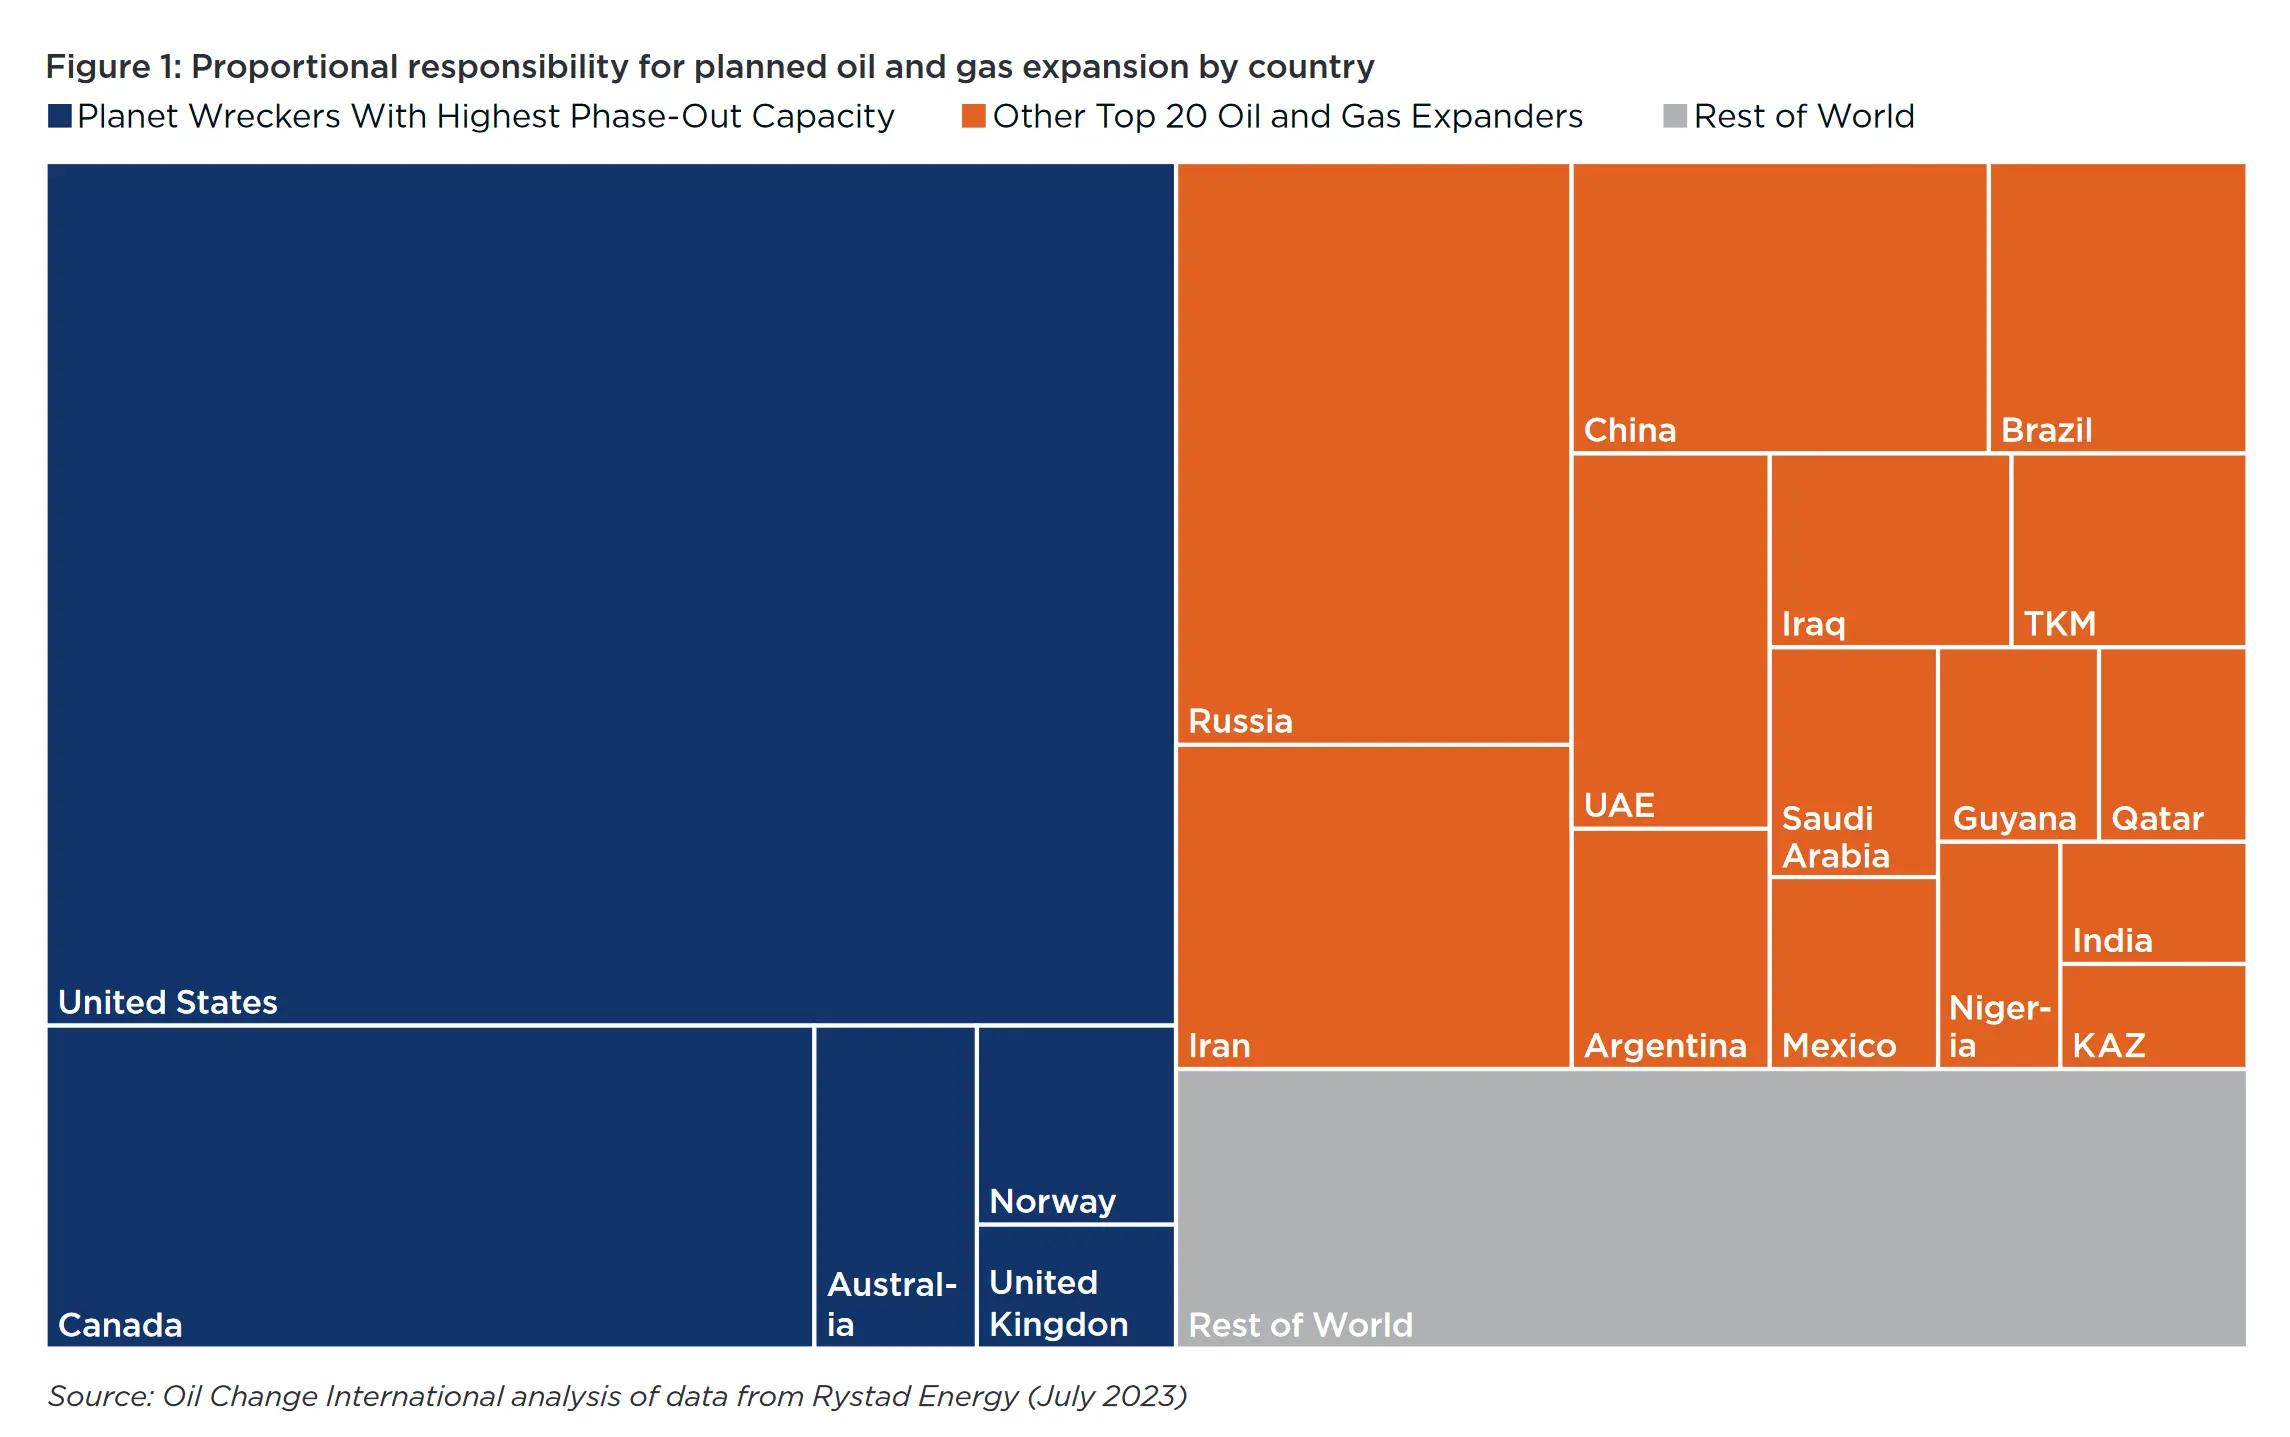 Area chart showing oil and gas expansion plans in terms of emitted CO2 by country